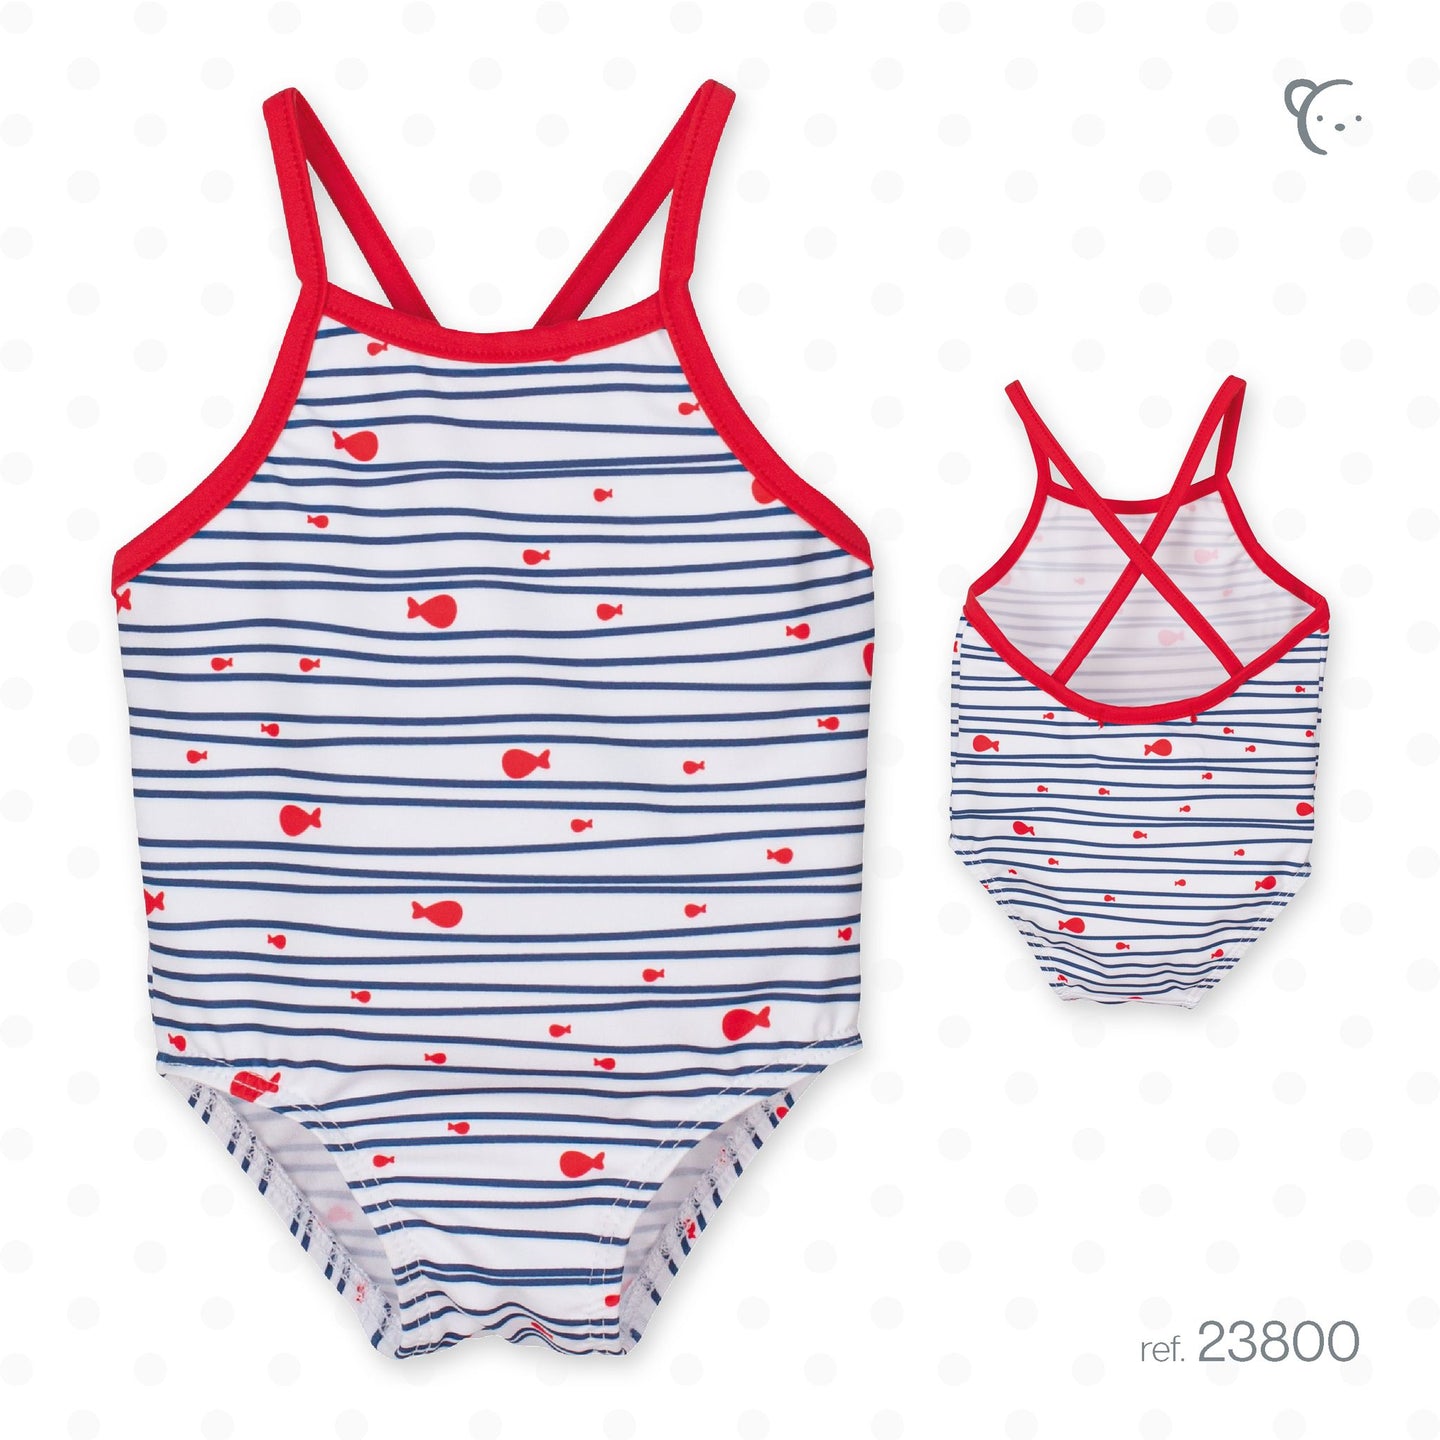 Red, white and blue striped swimsuit in pocket